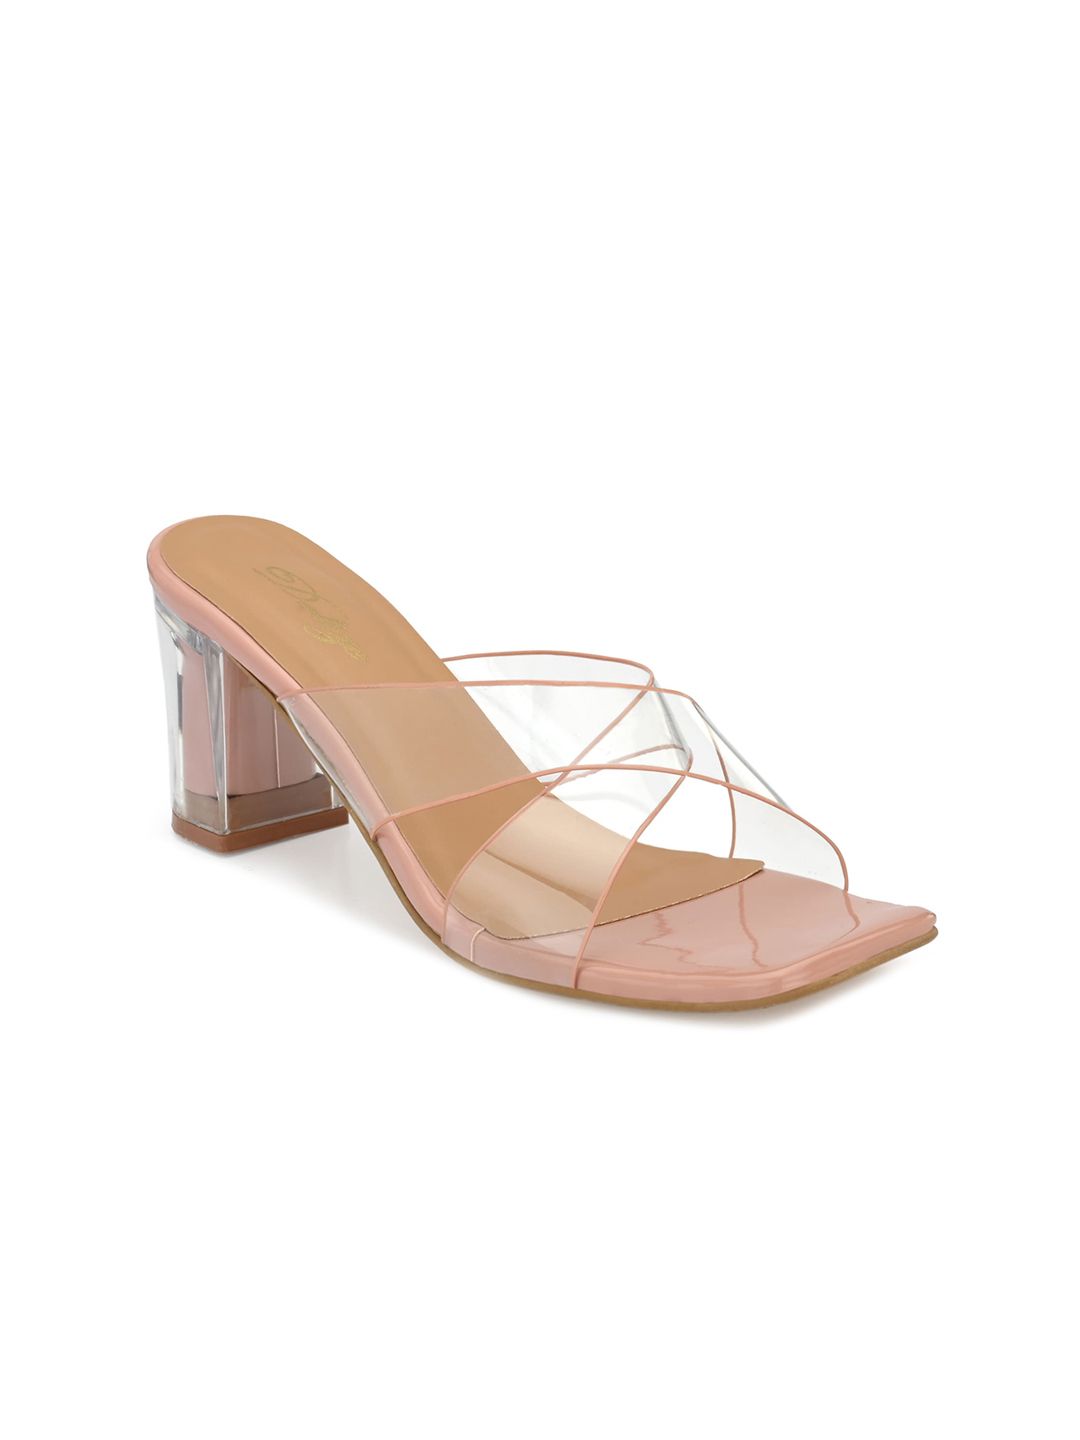 Delize Pink Textured Party Block Sandals with Buckles Price in India